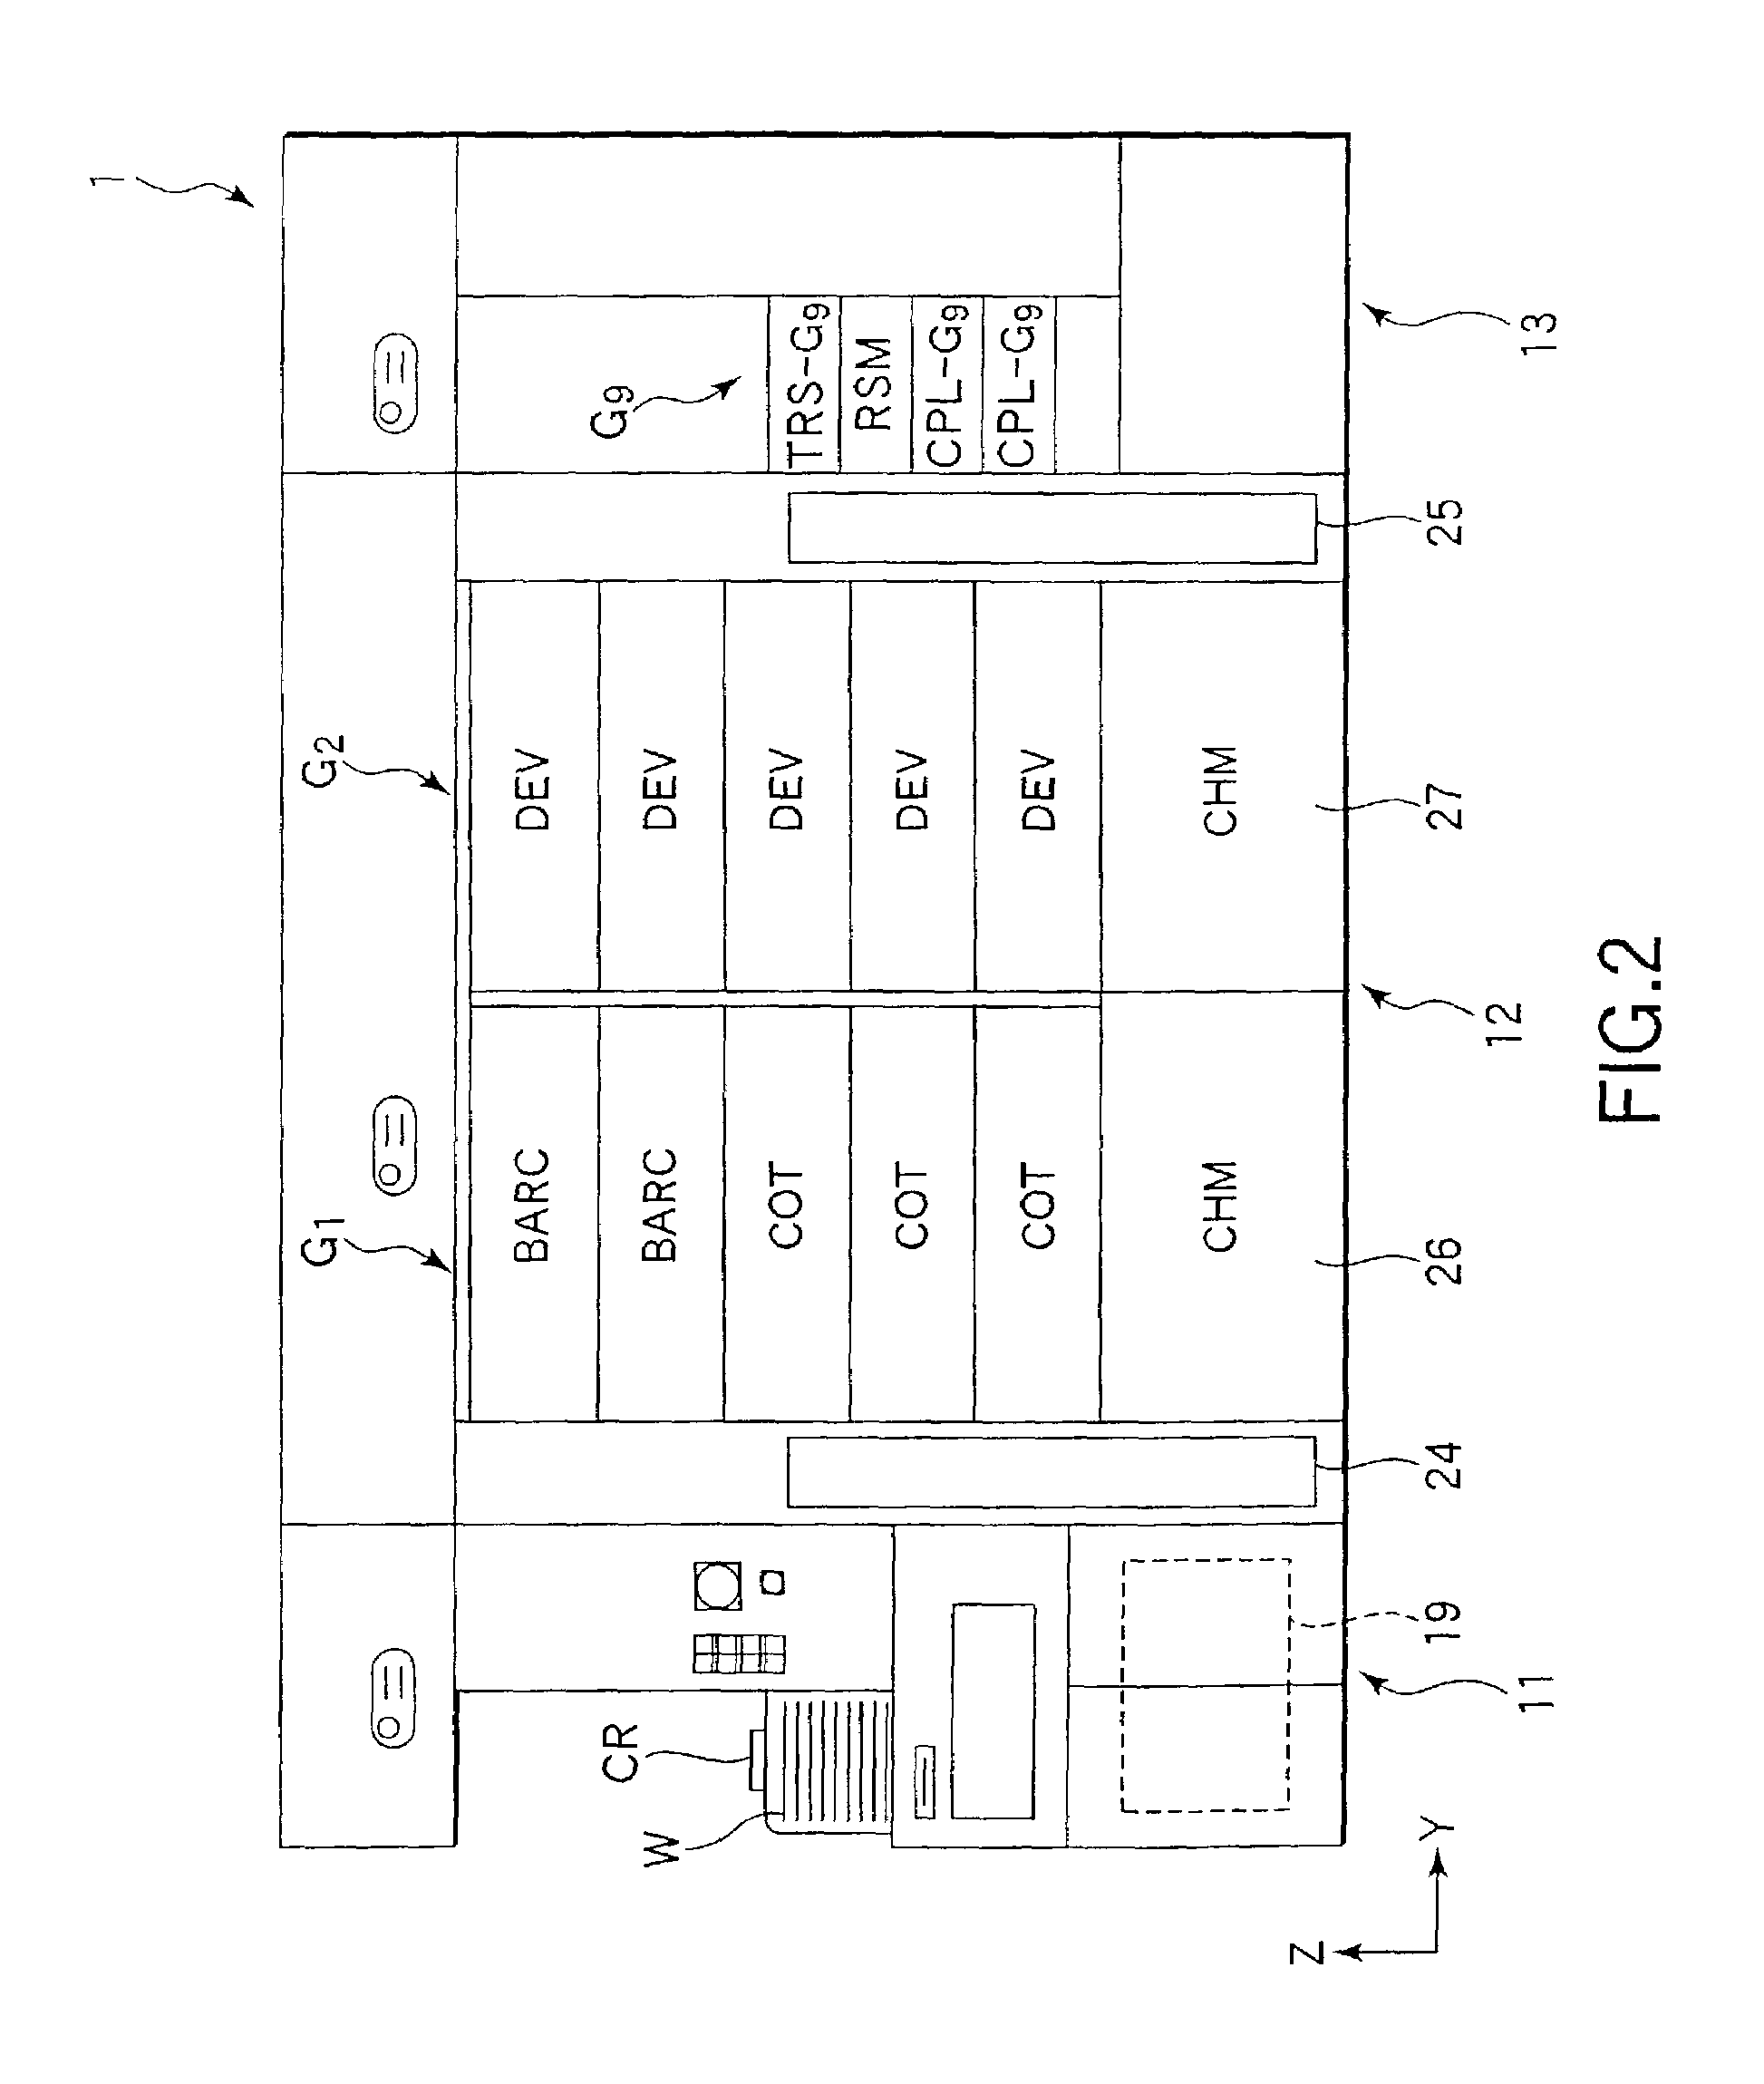 Substrate processing apparatus and substrate transferring method